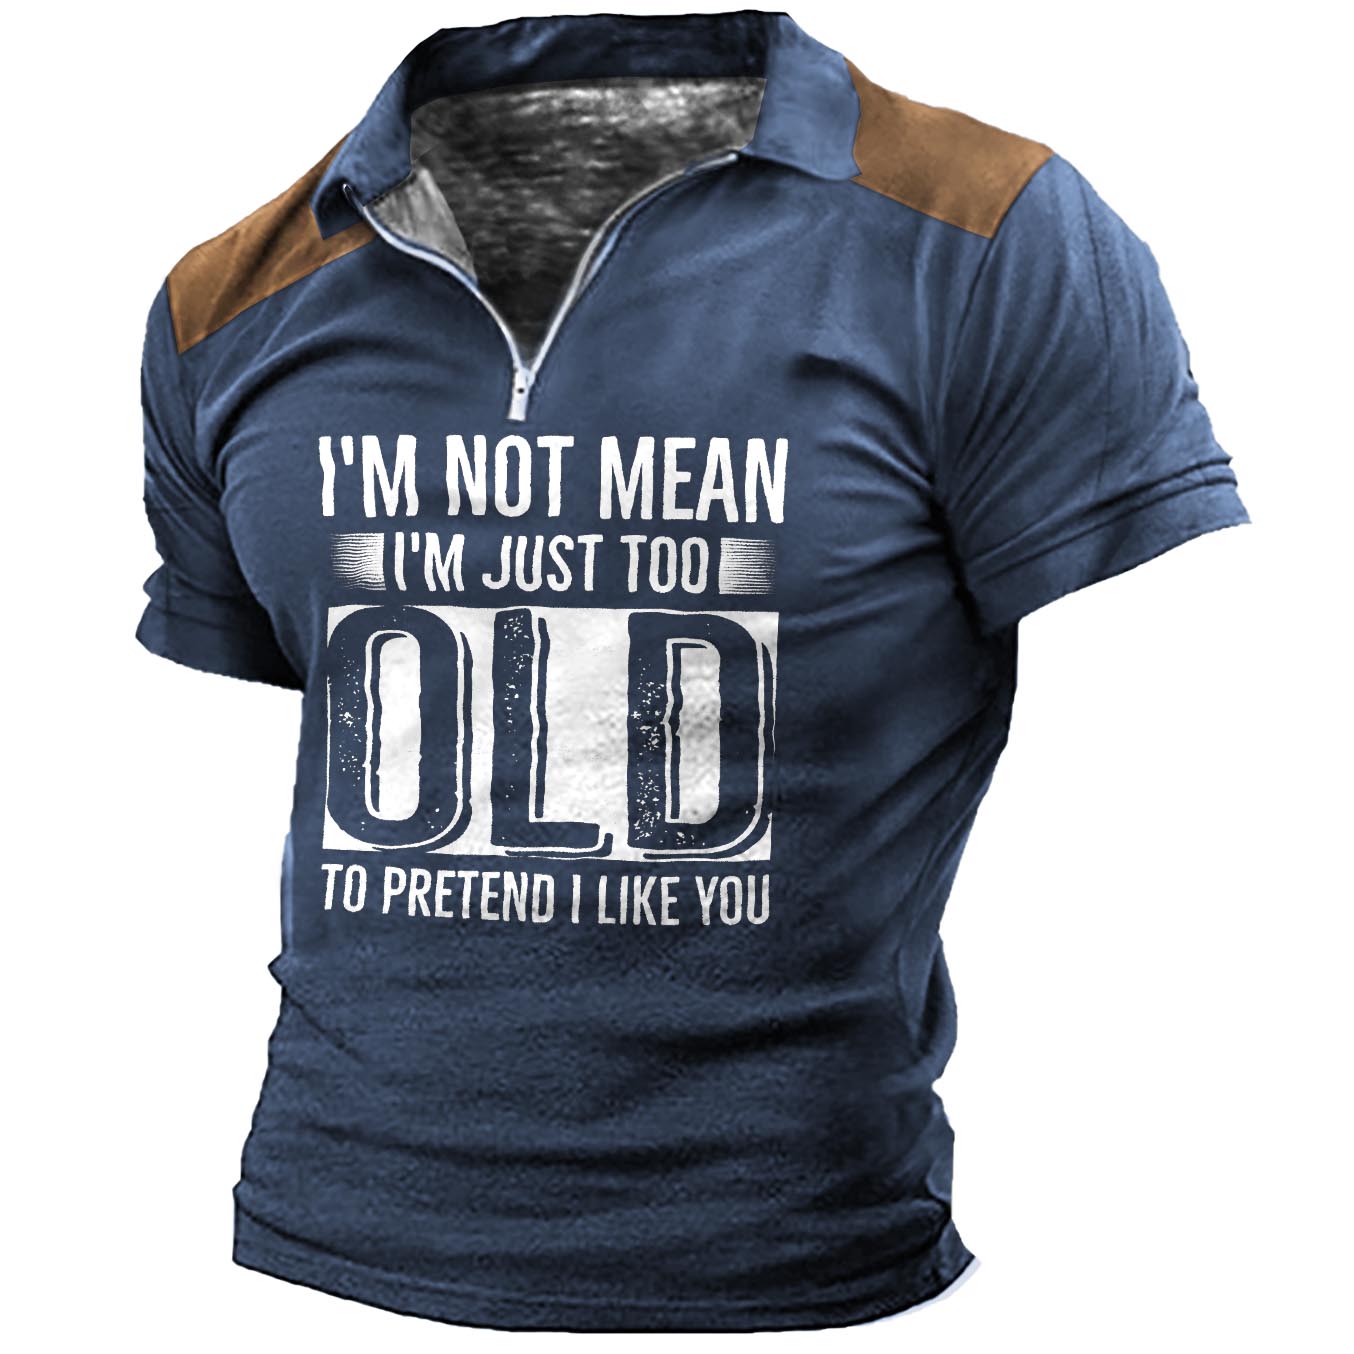 Men's Vintage I'm Not Chic Mean I'm Just Too Old To Pretend I Like You Zip Polo T-shirt